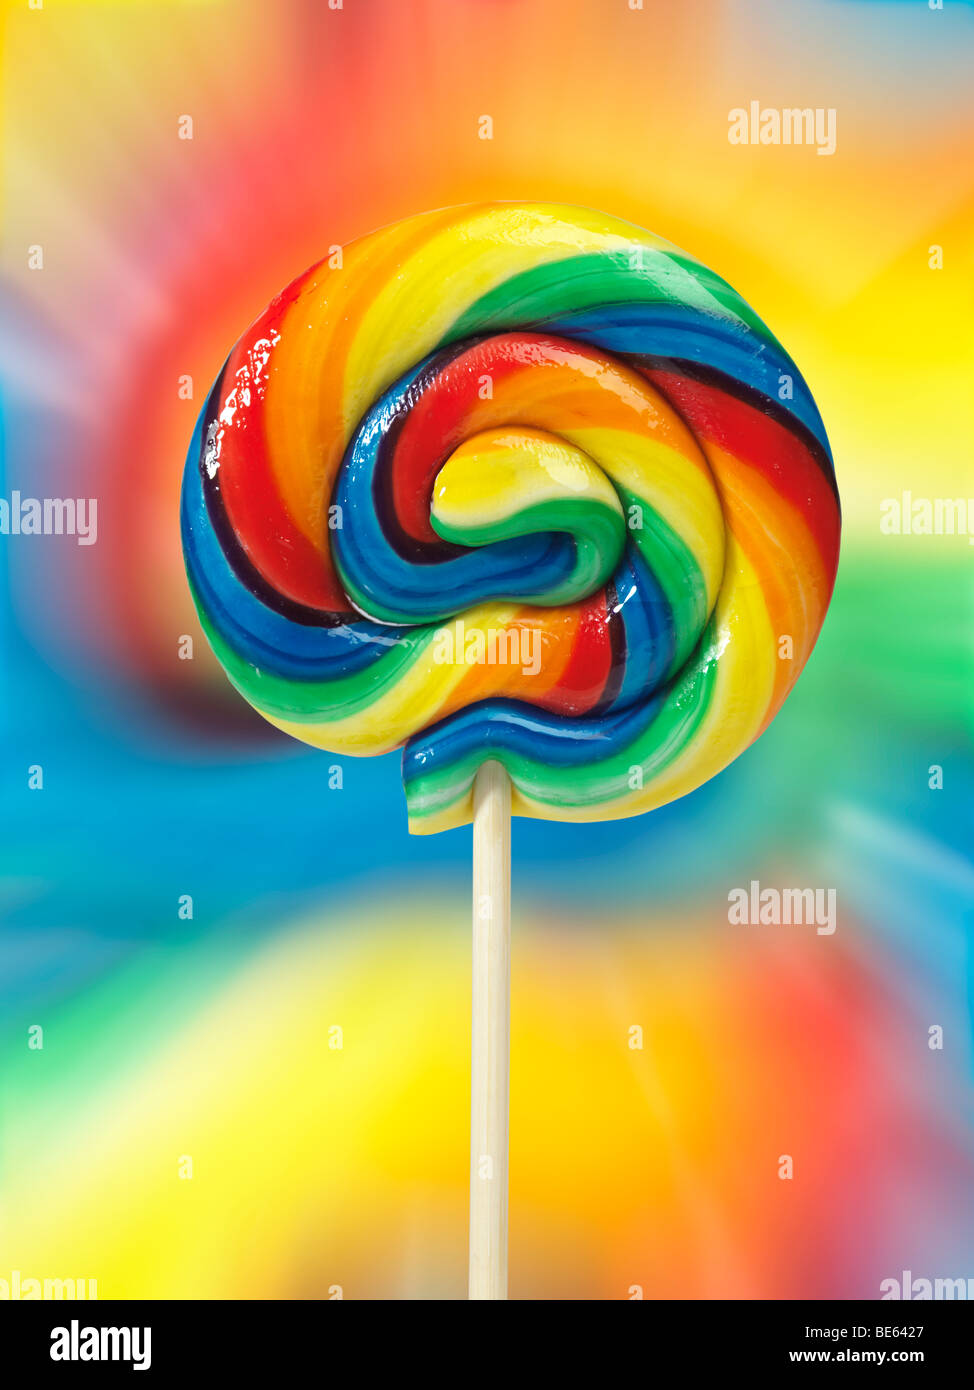 Colorful appetizing lollipop on colorful background Stock Photo